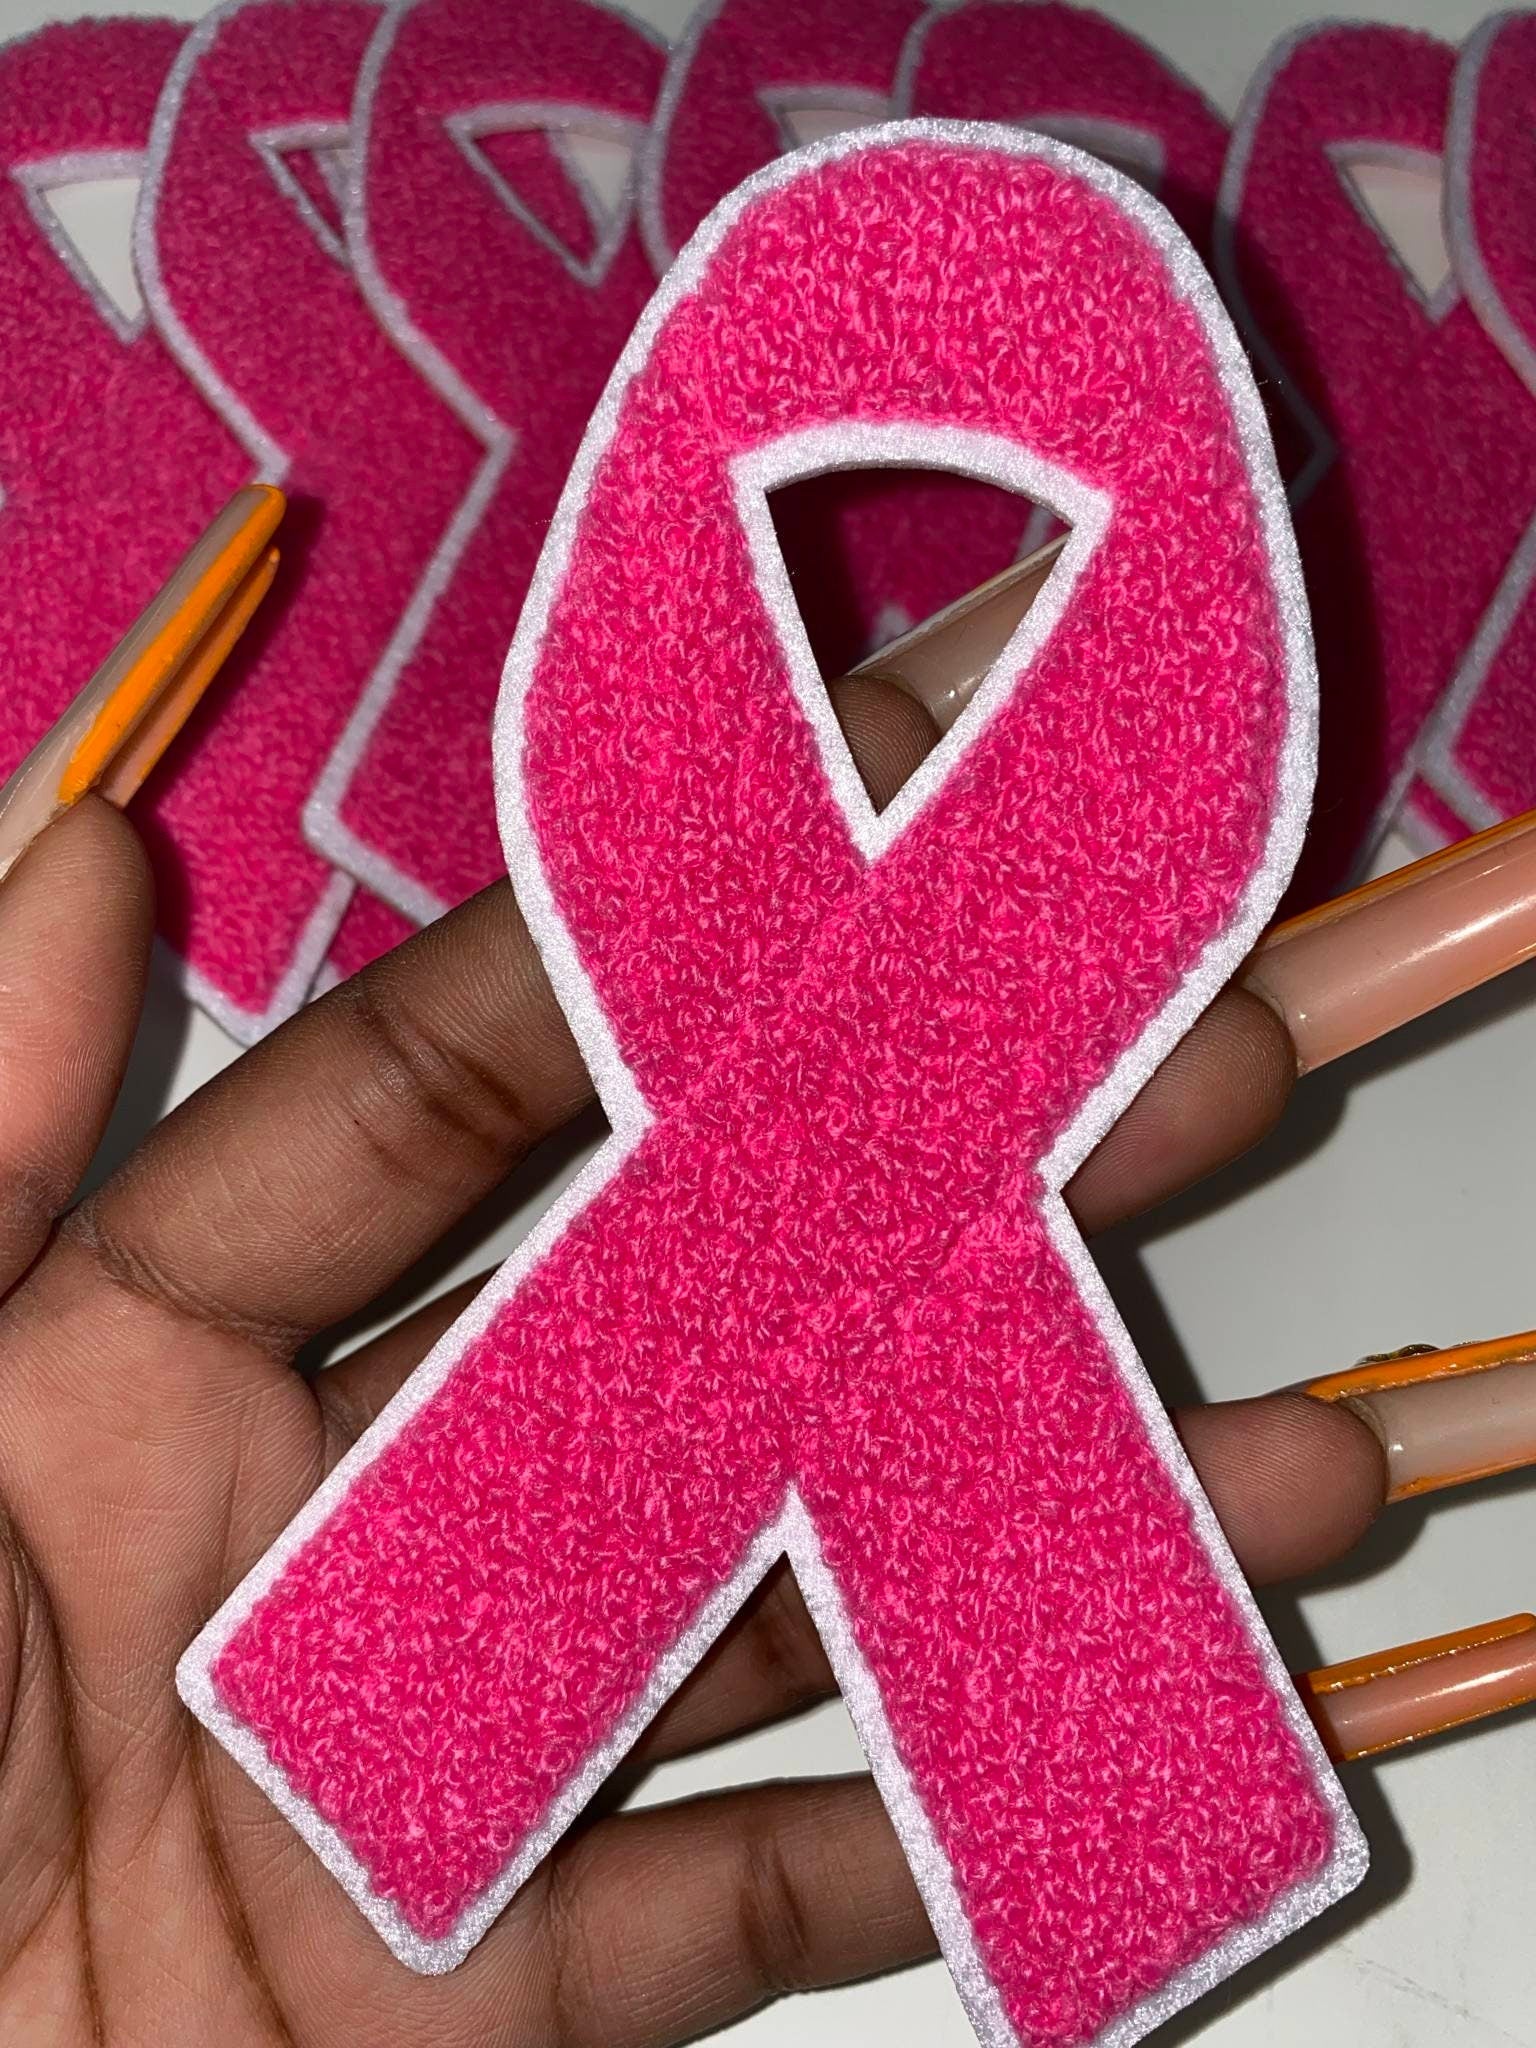 New 1-pc, Breast Cancer "Pink Chenille" Awareness Ribbon Patch, 5.5" Iron or Sew-on, Cancer  Patch/Applique, Think Pink, Support Ribbon